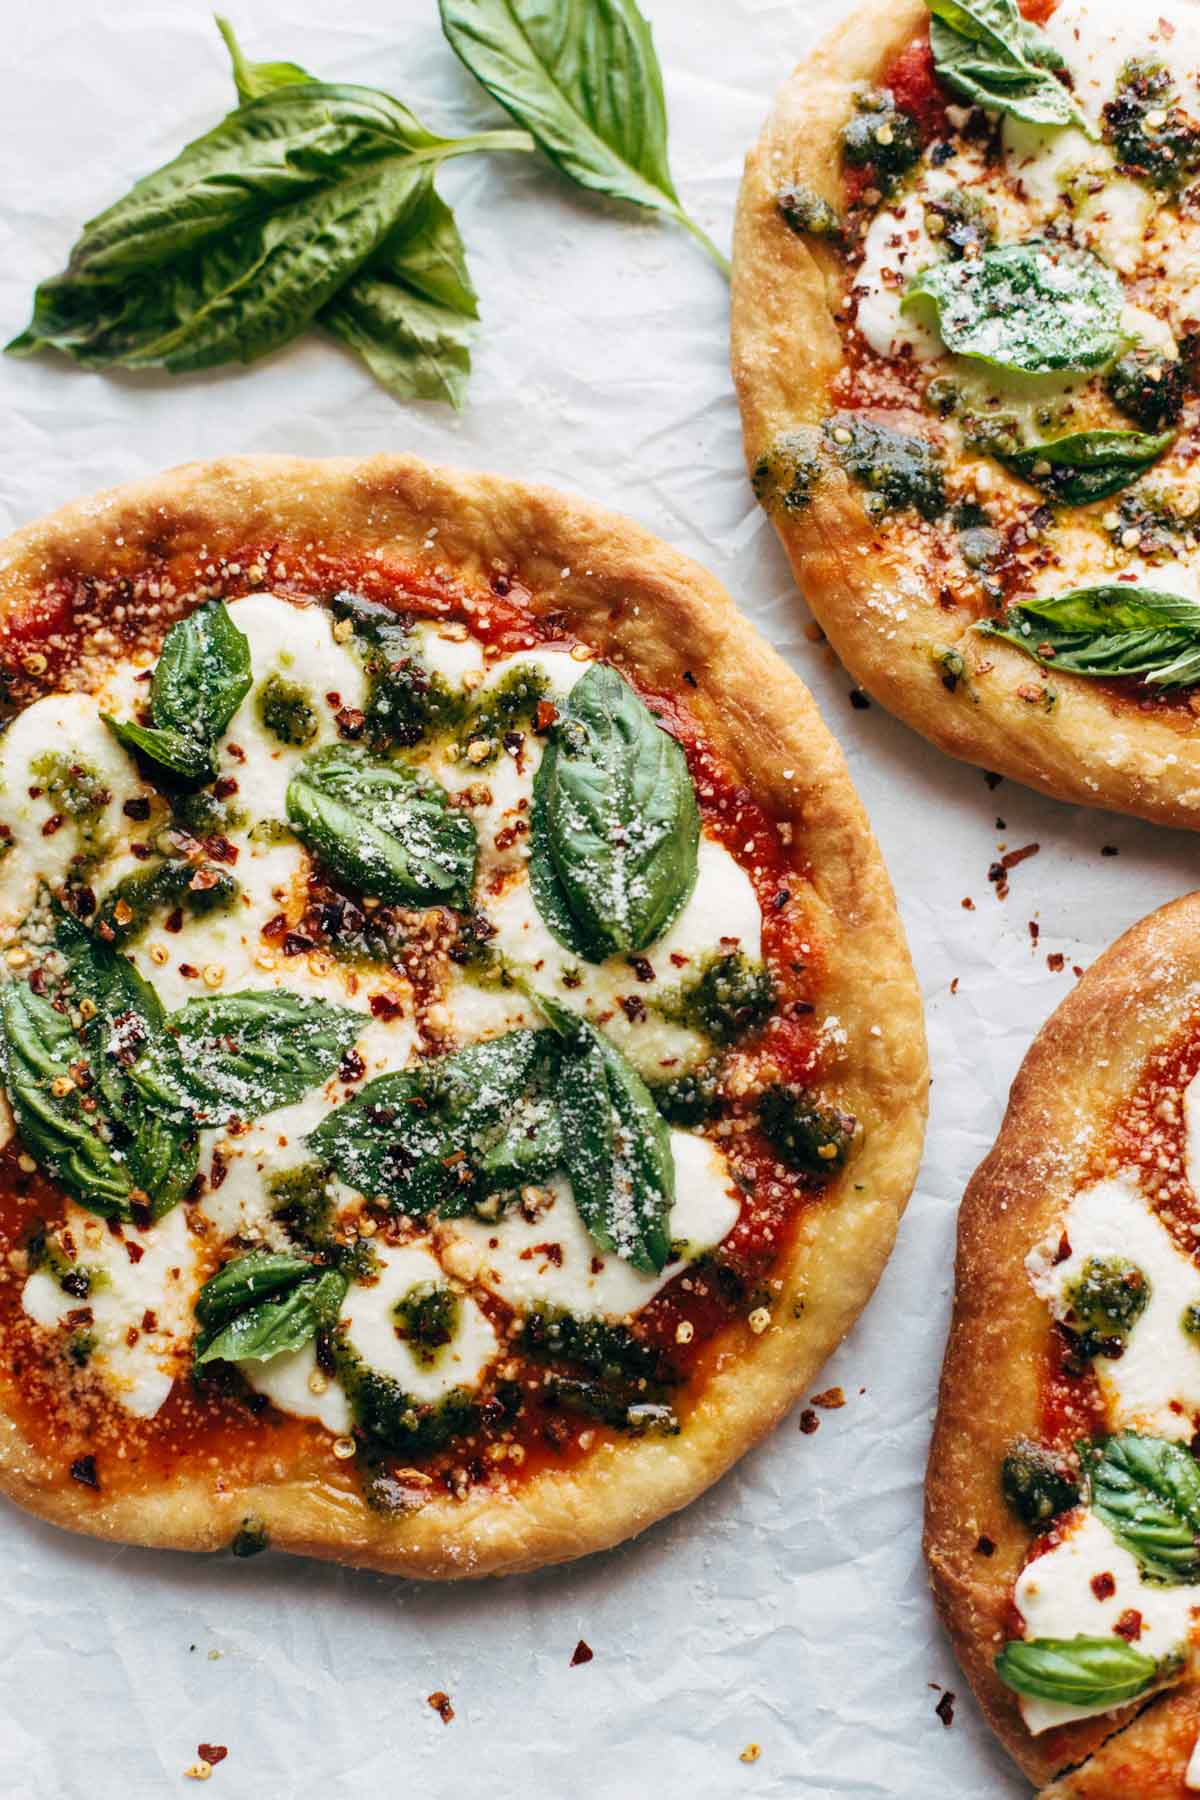 Life-Changing Crispy Fried Pizzas